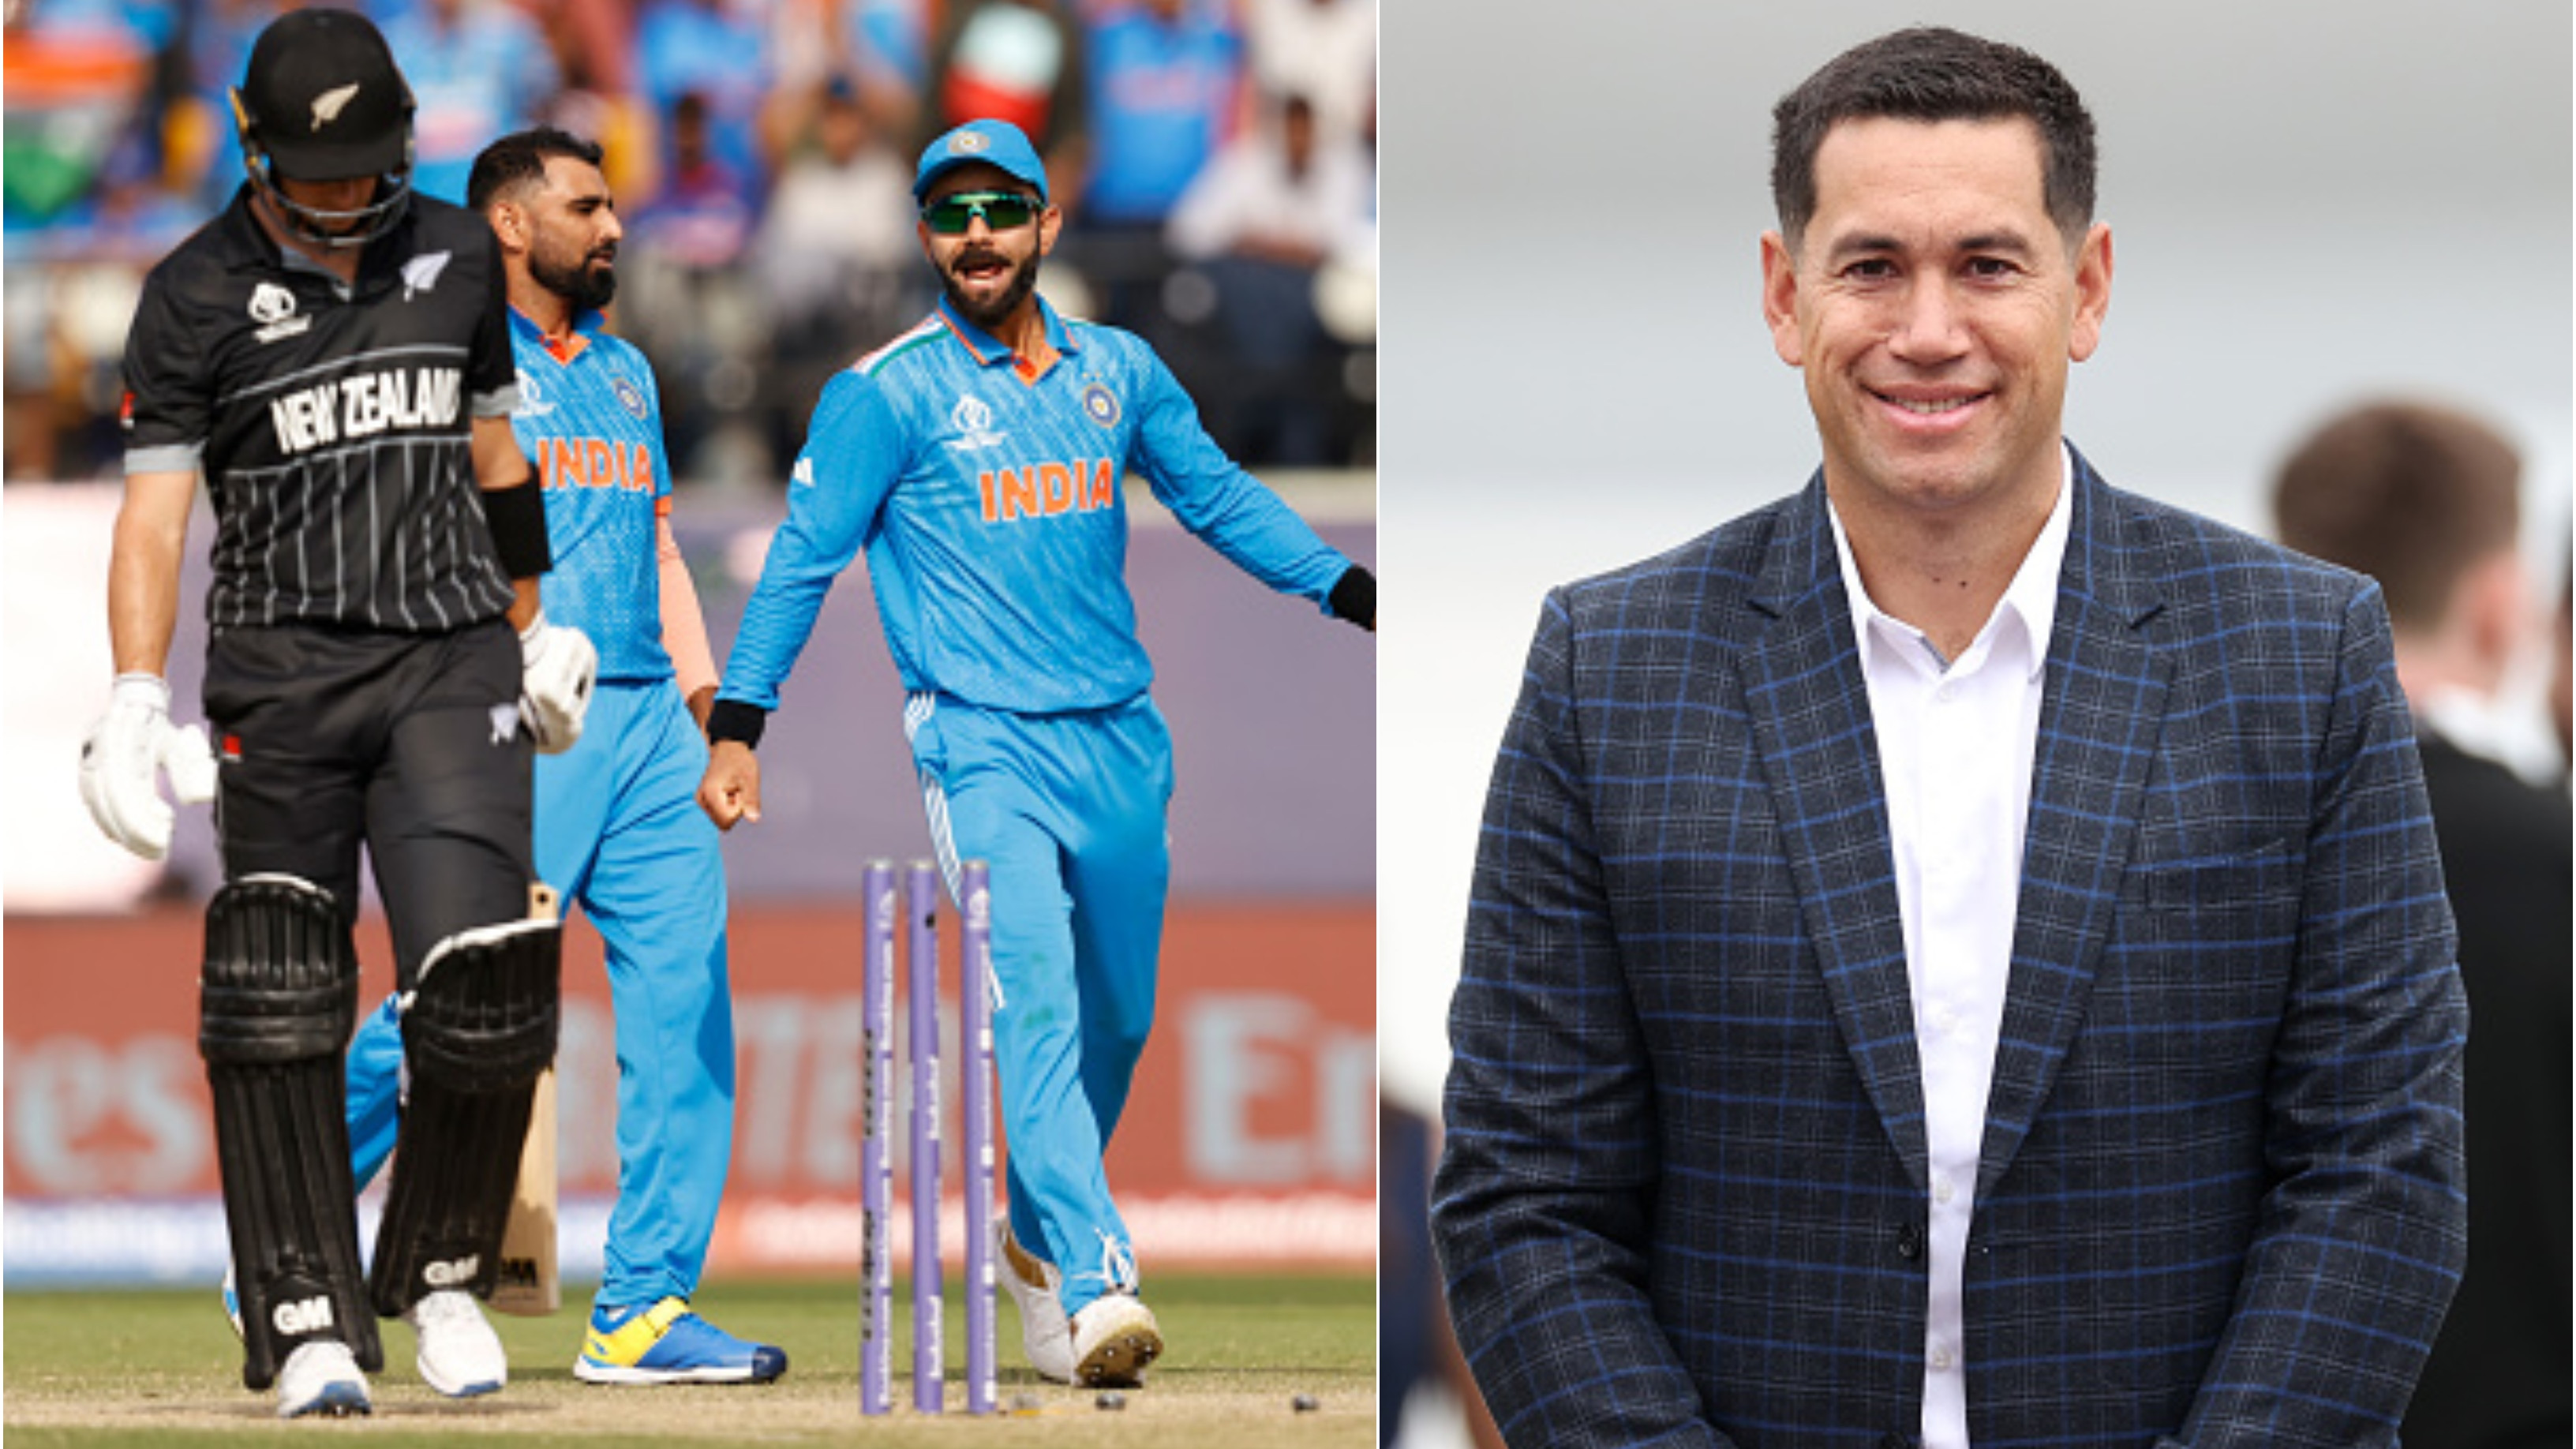 CWC 2023: “India will be nervous facing New Zealand,” claims Ross Taylor ahead of big semi-final